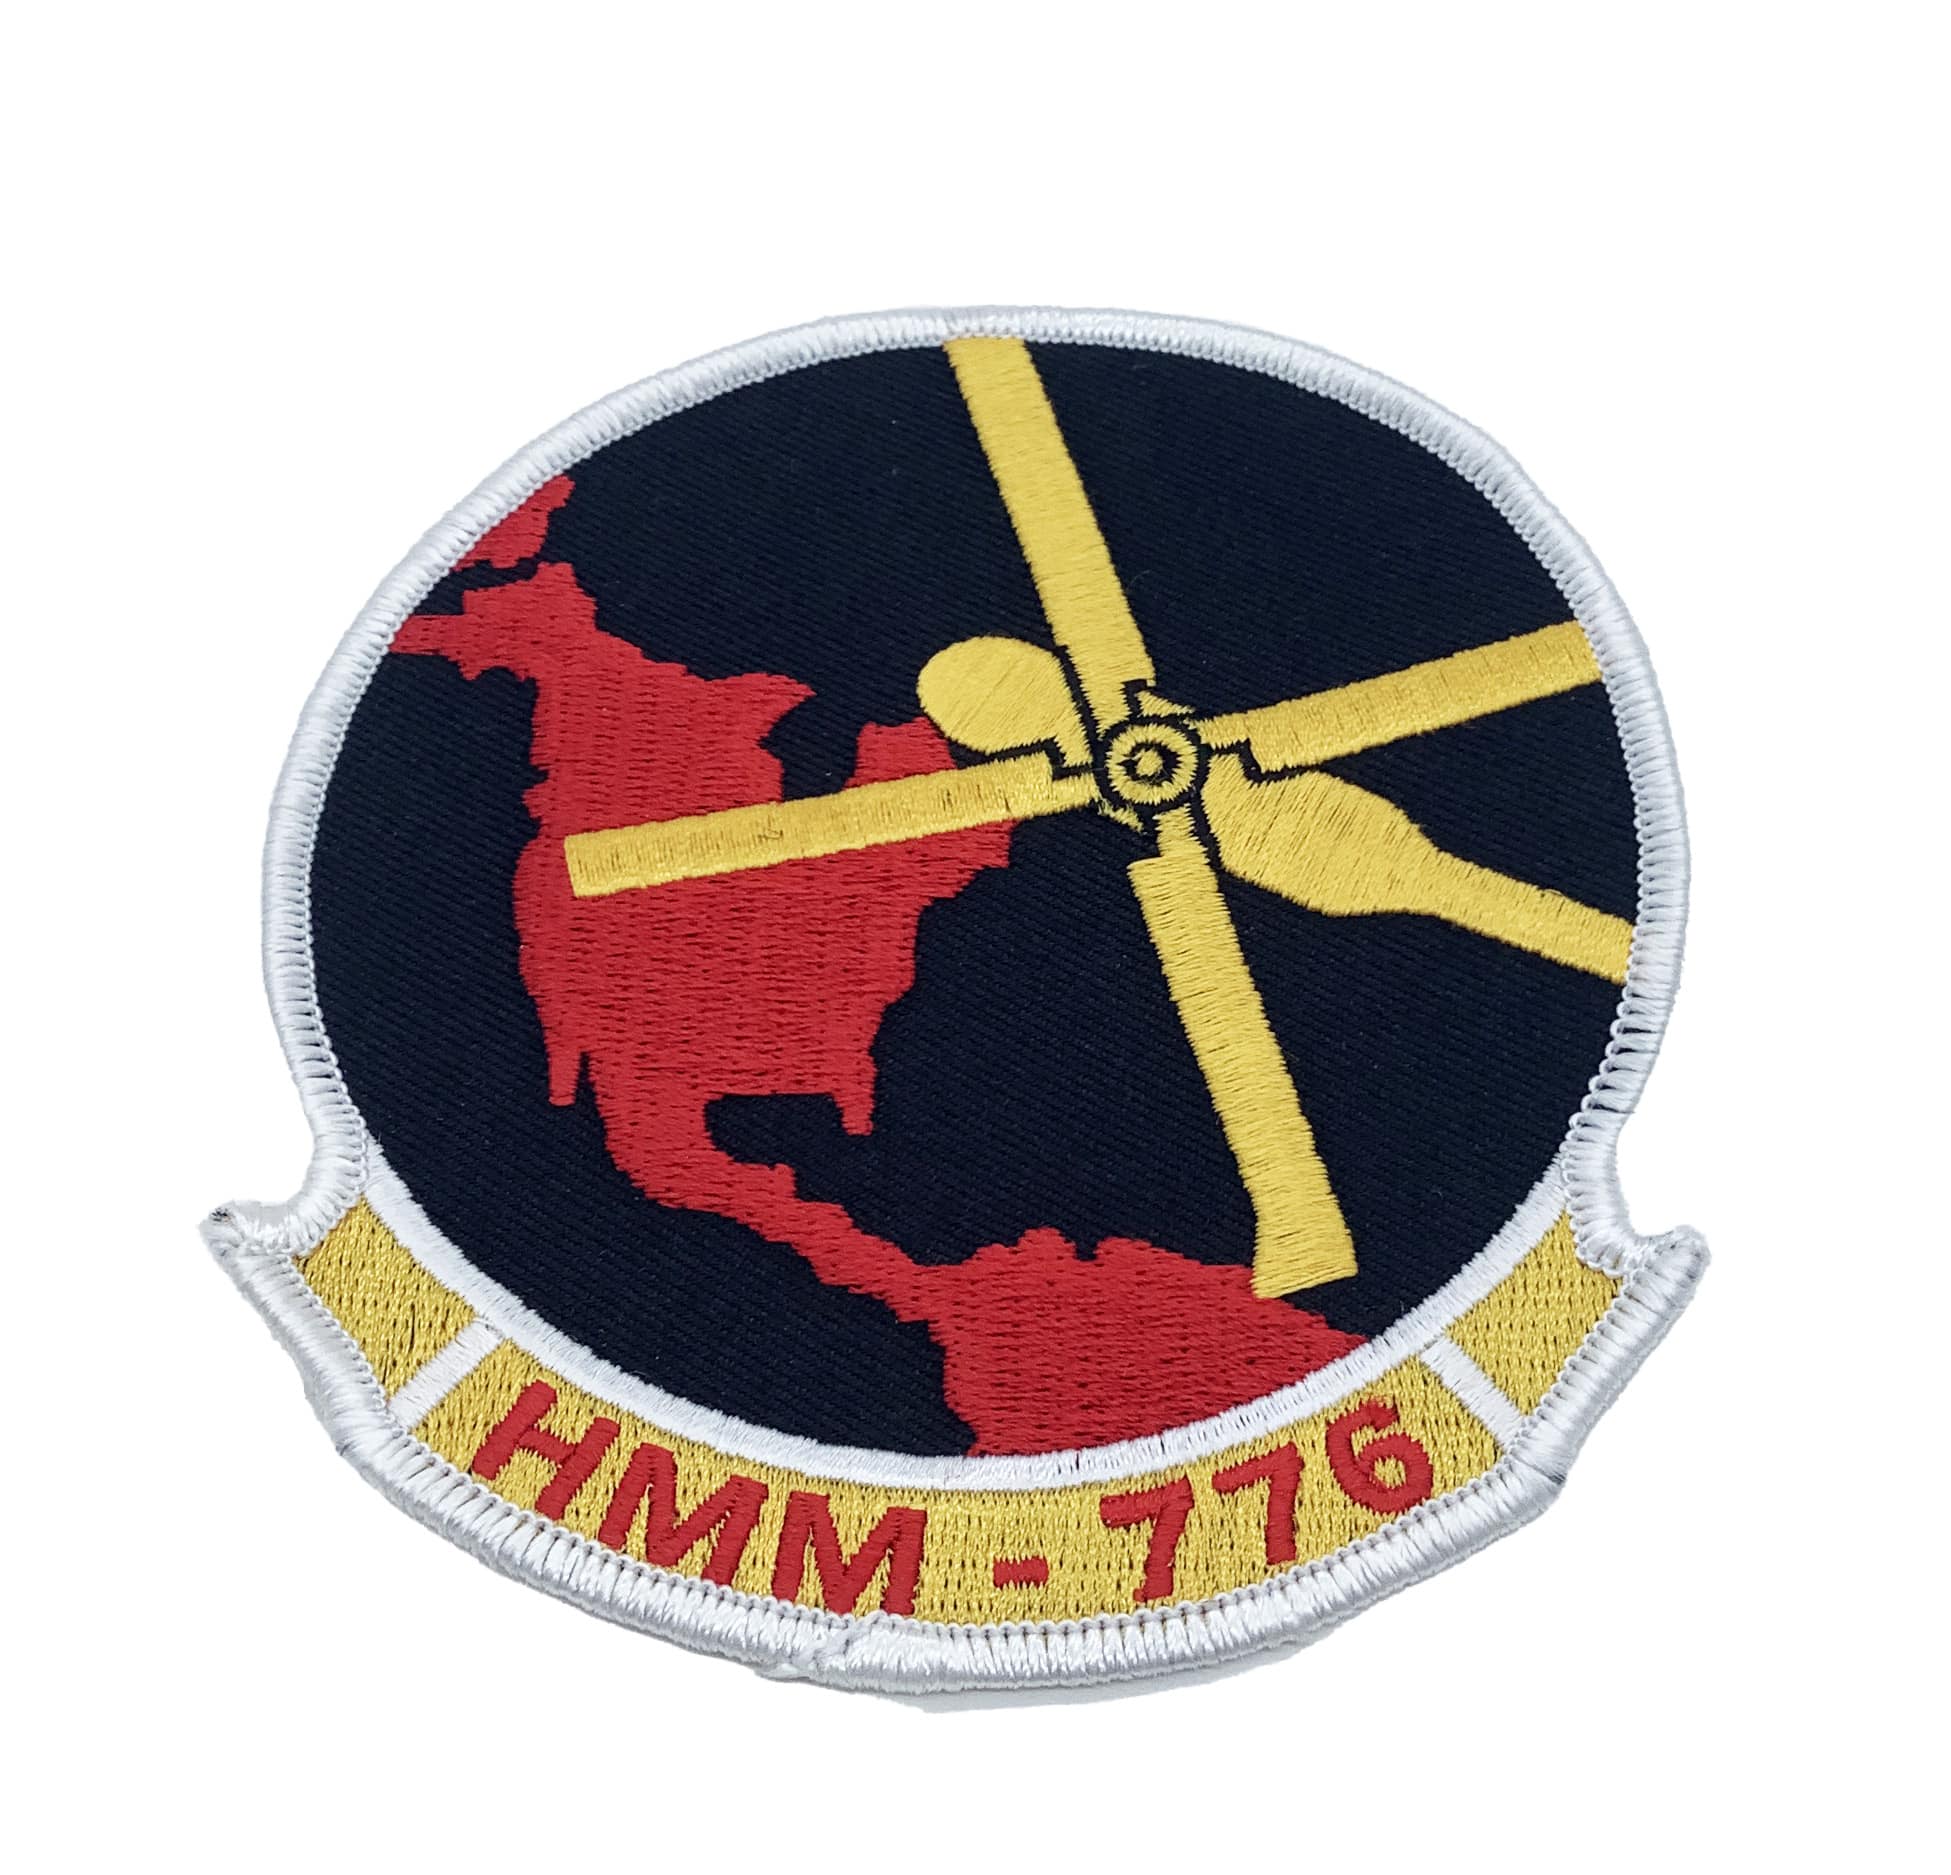 HMM 776 Squadron Patch- No Hook and Loop